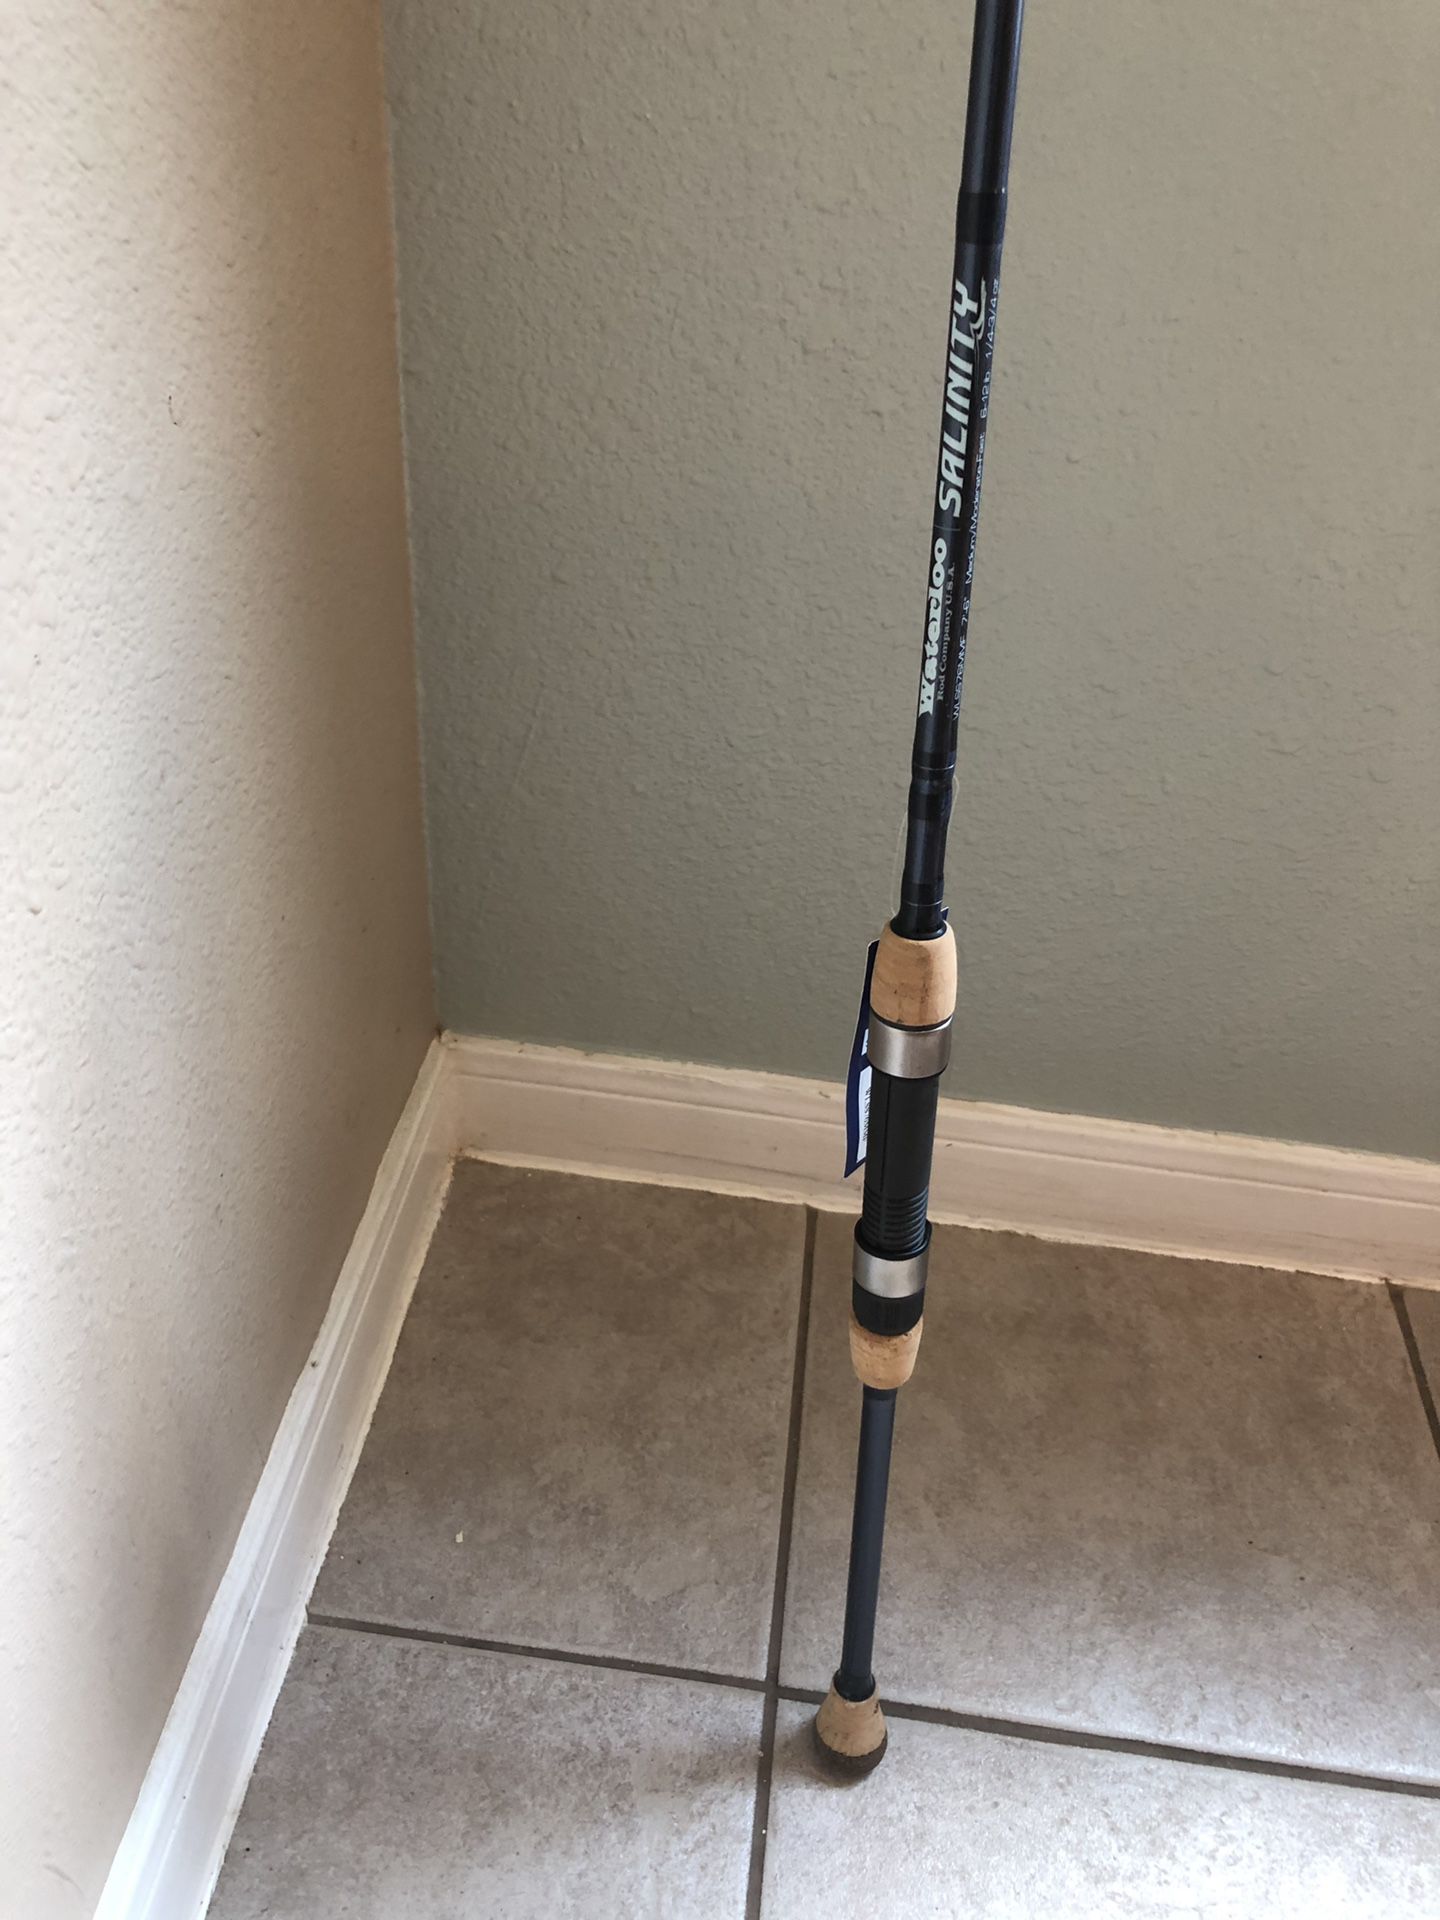 Salinity Series Waterloo 7' 6” Fishing Rod for Sale in Tomball, TX - OfferUp